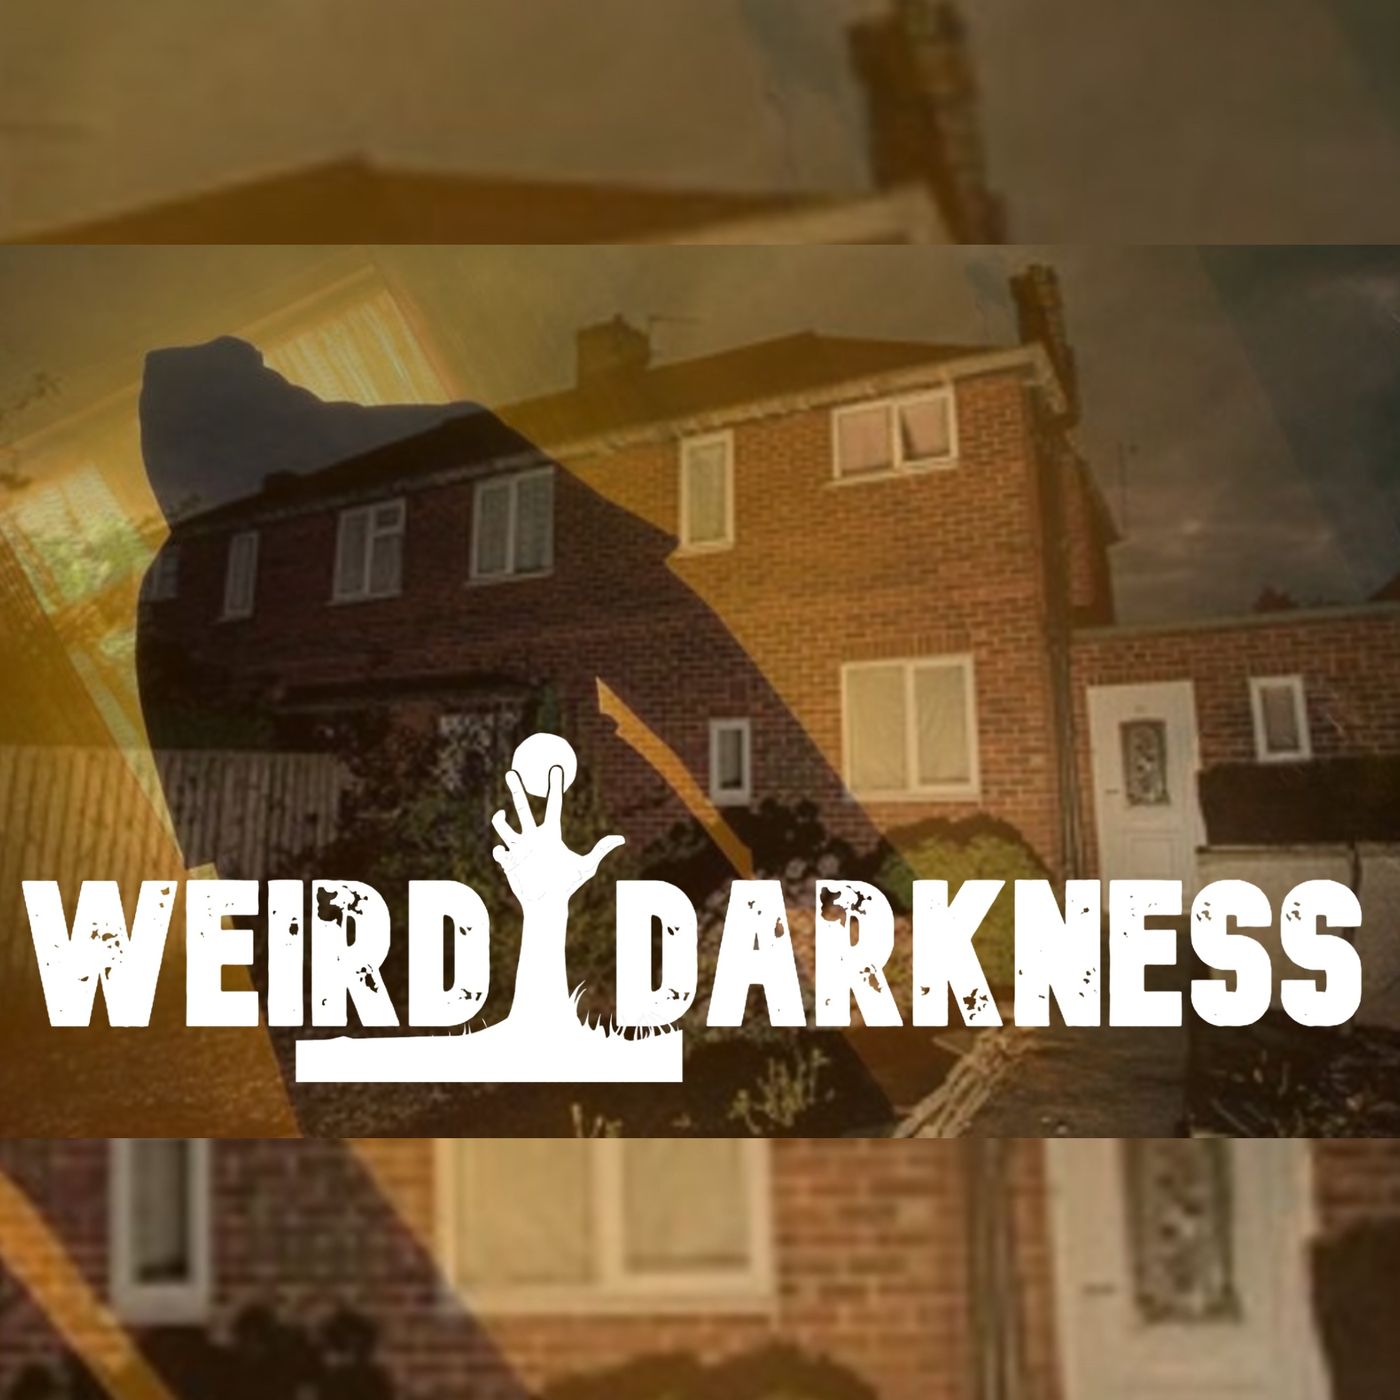 “THE BLACK MONK OF 30 EAST DRIVE” and More True Paranormal Stories! #WeirdDarkness